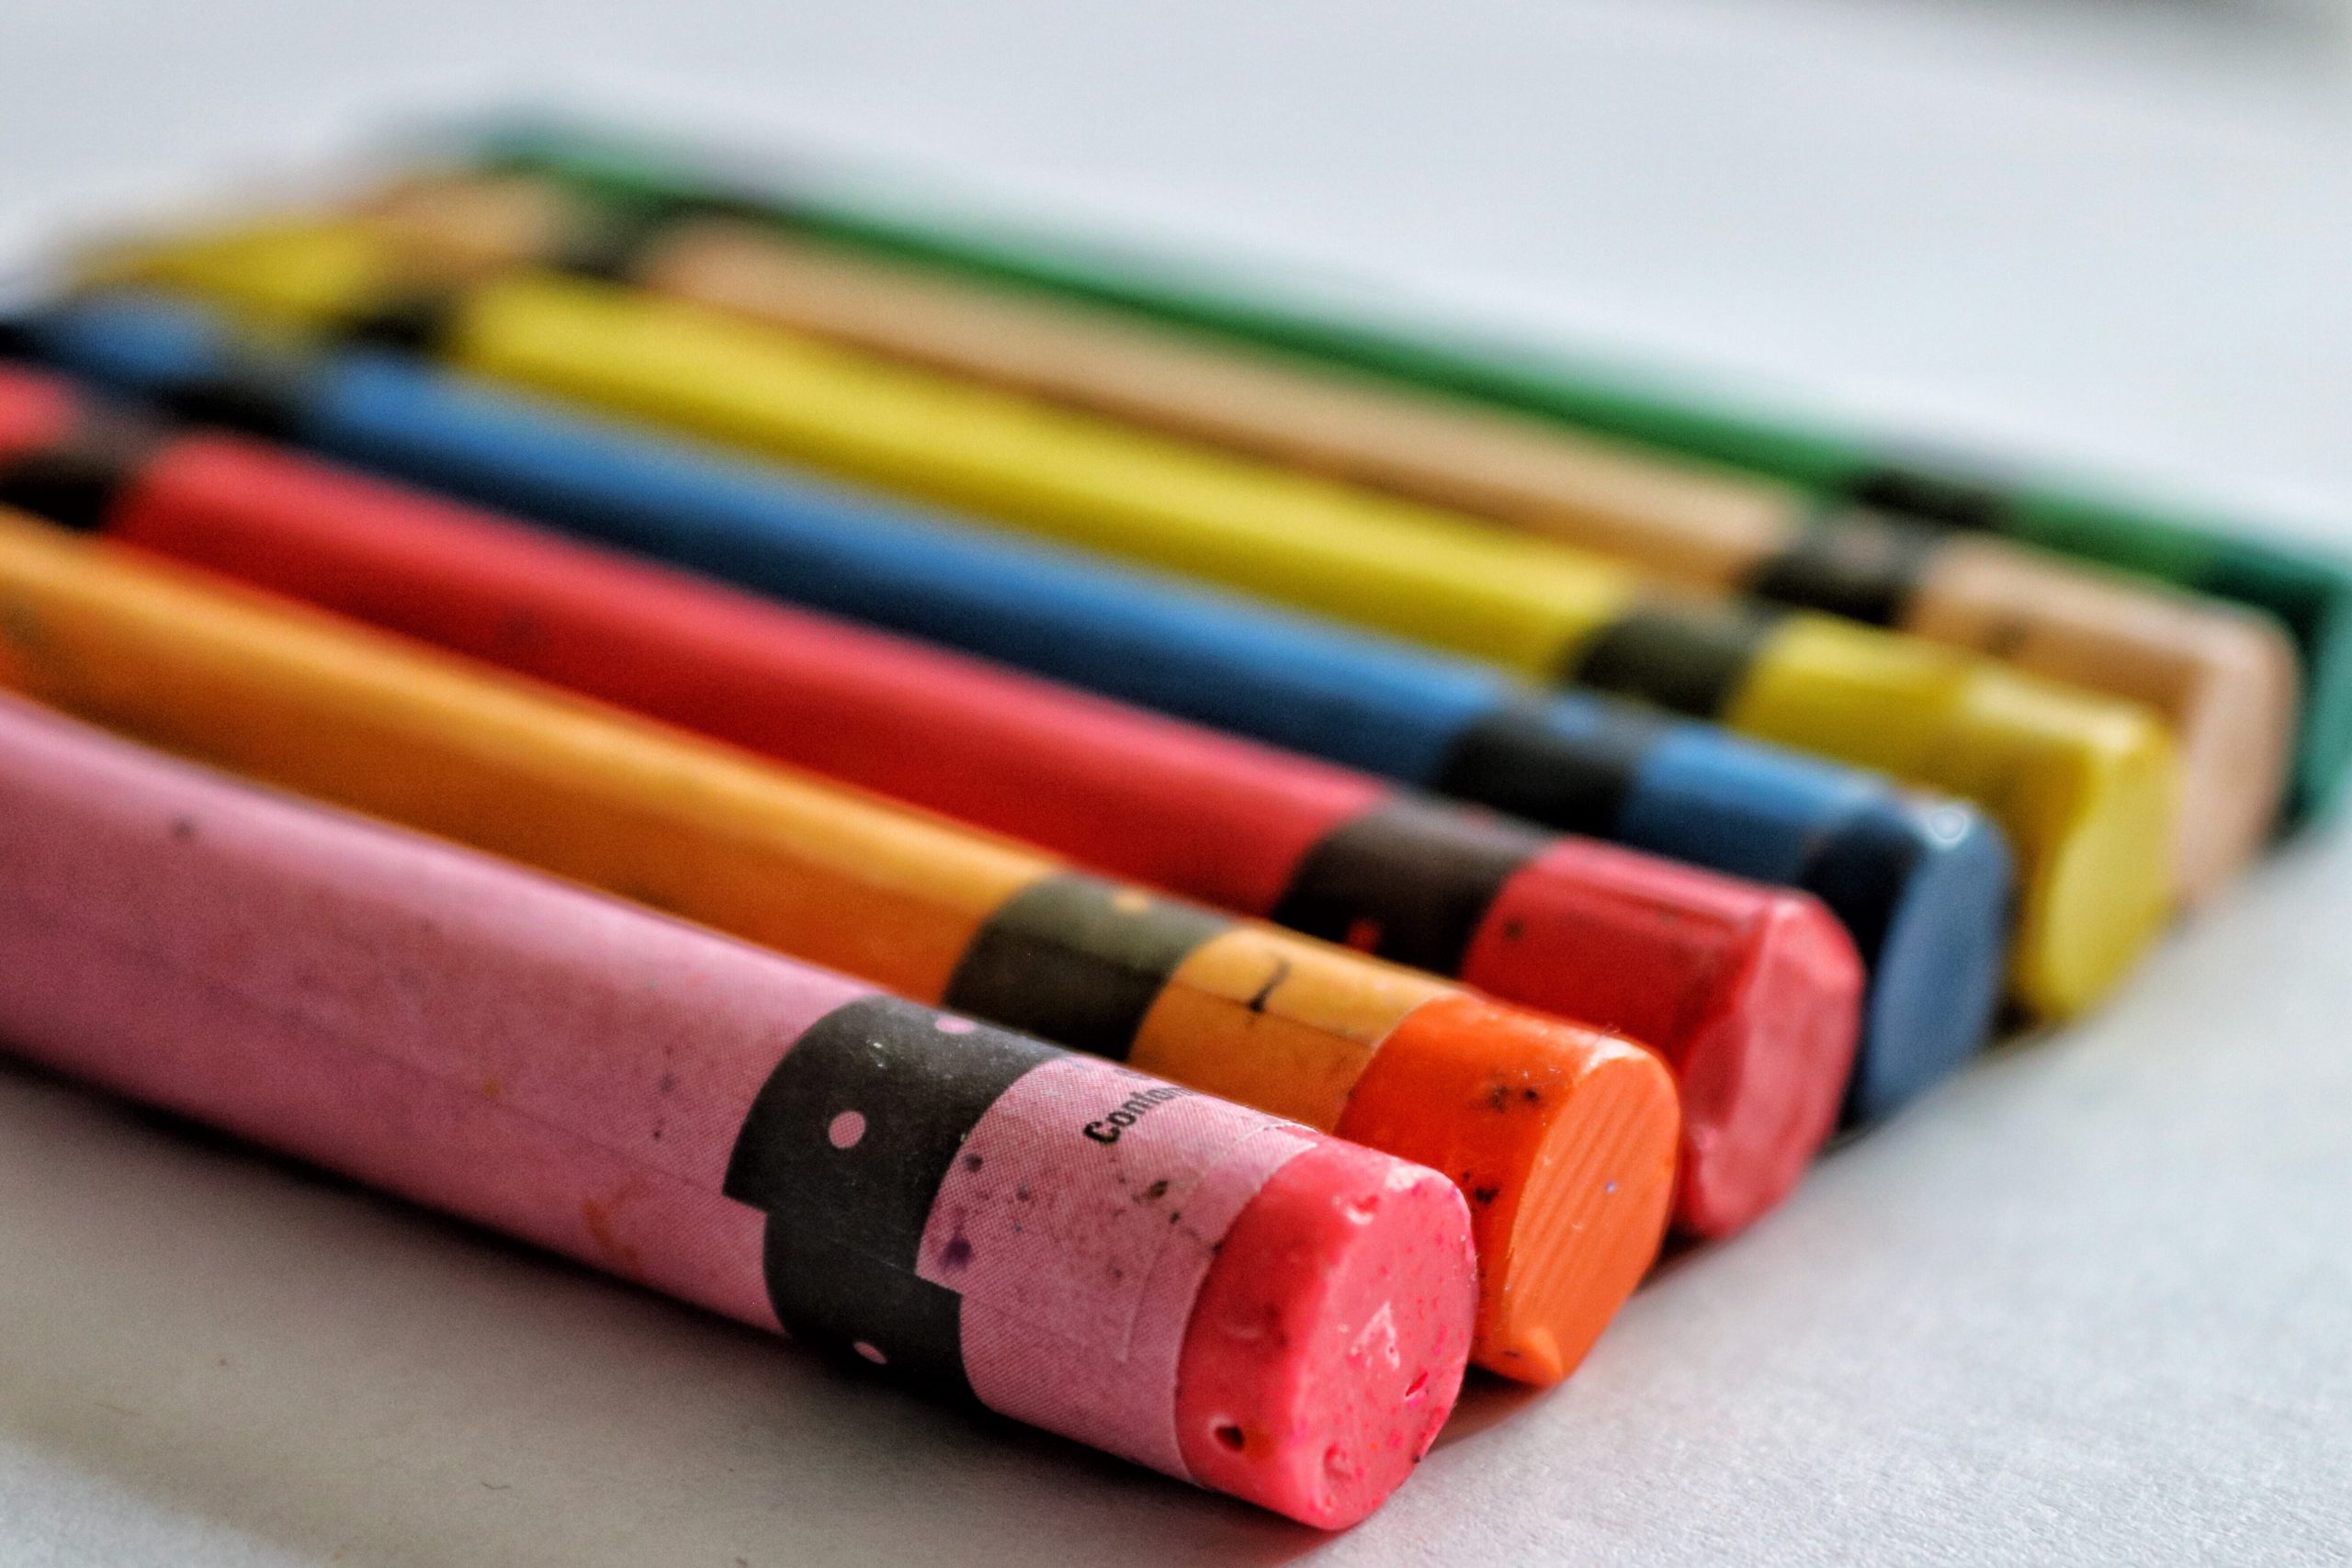 crayon - Wiktionary, the free dictionary